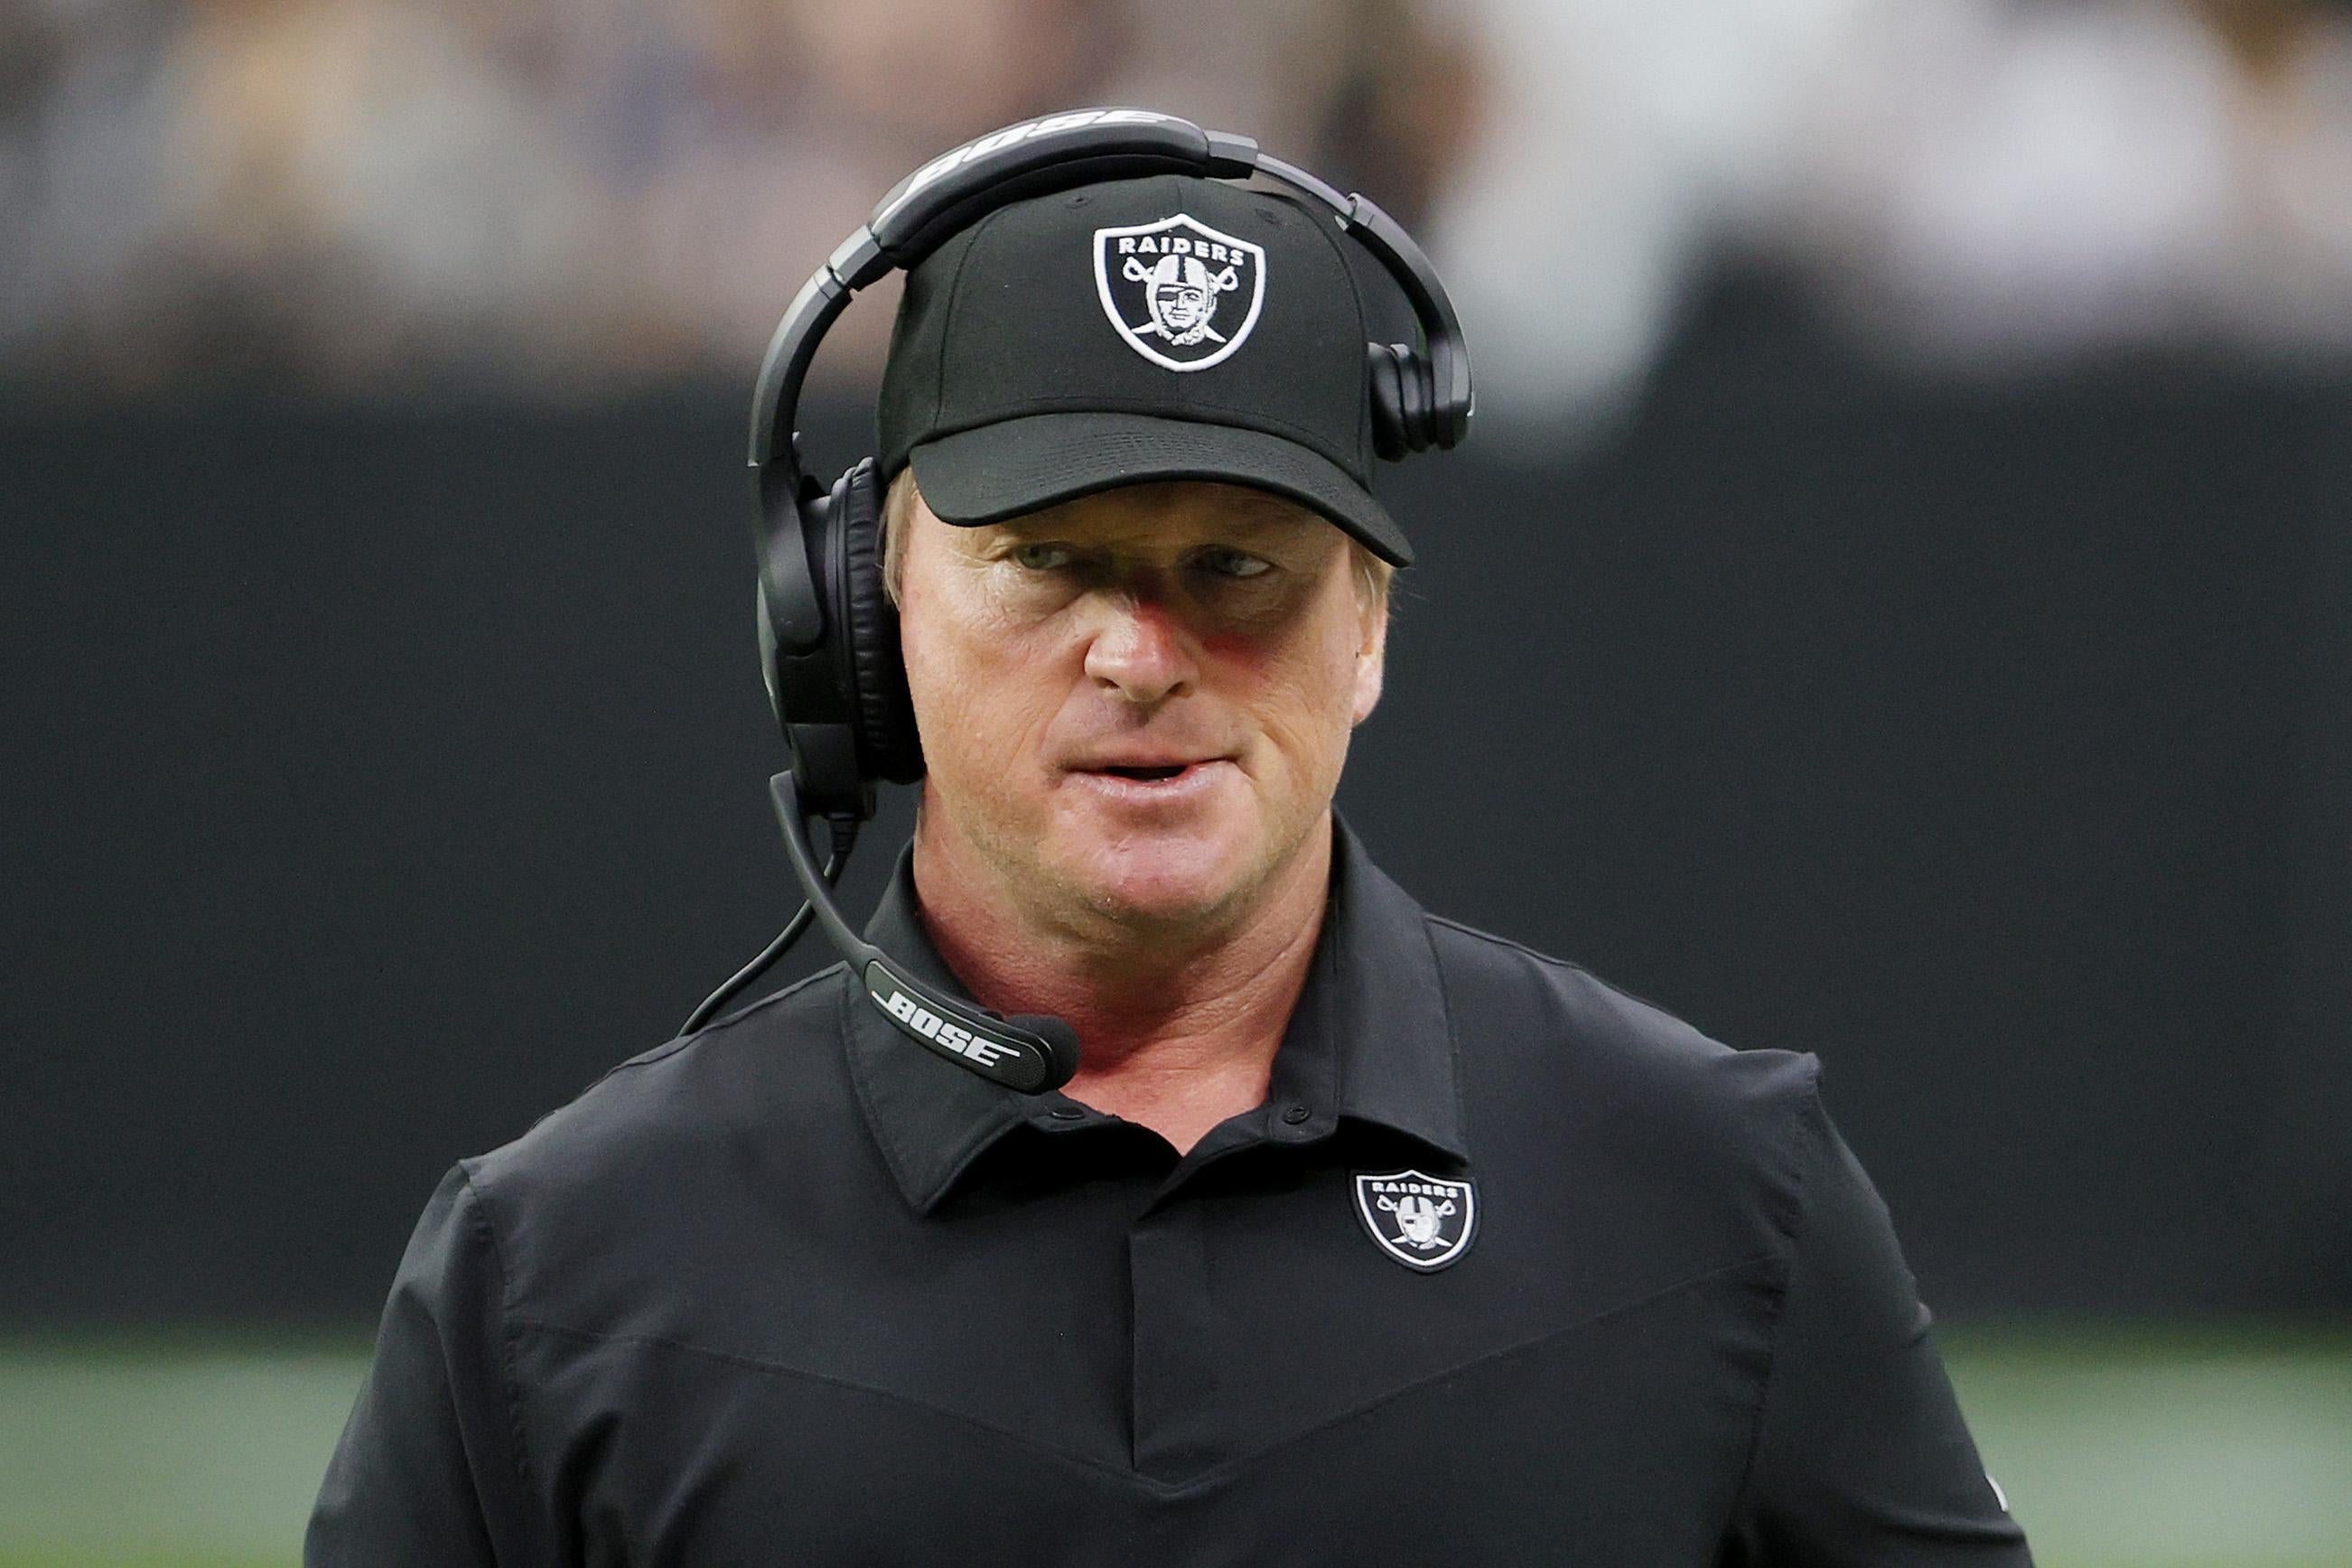 Gruden looking askance in his Raiders hat and polo and headset